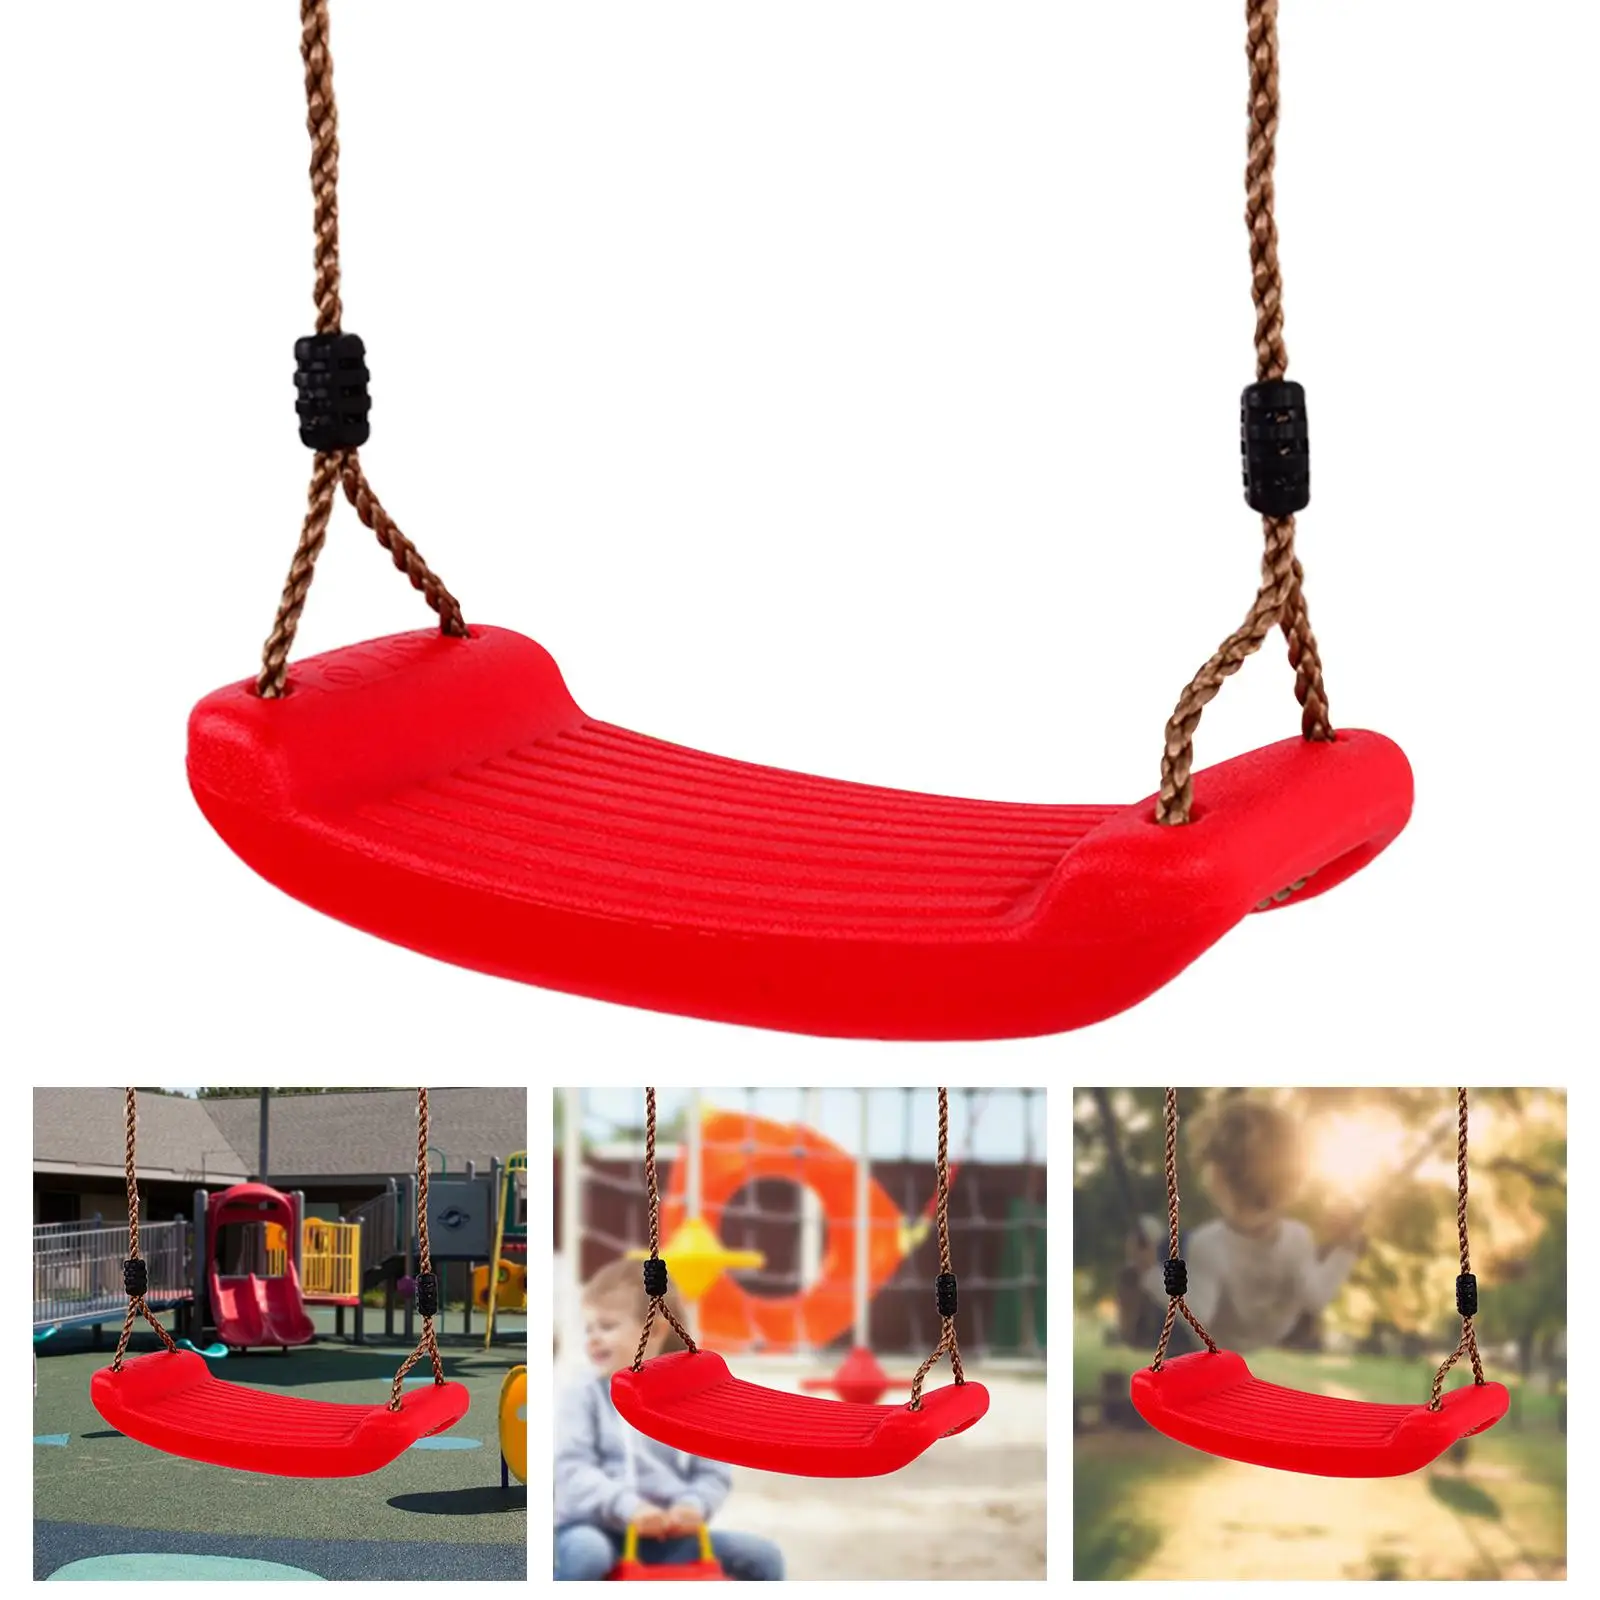 Kids Swing Set Curved Board Swing Chair for Backyard Playground Playroom